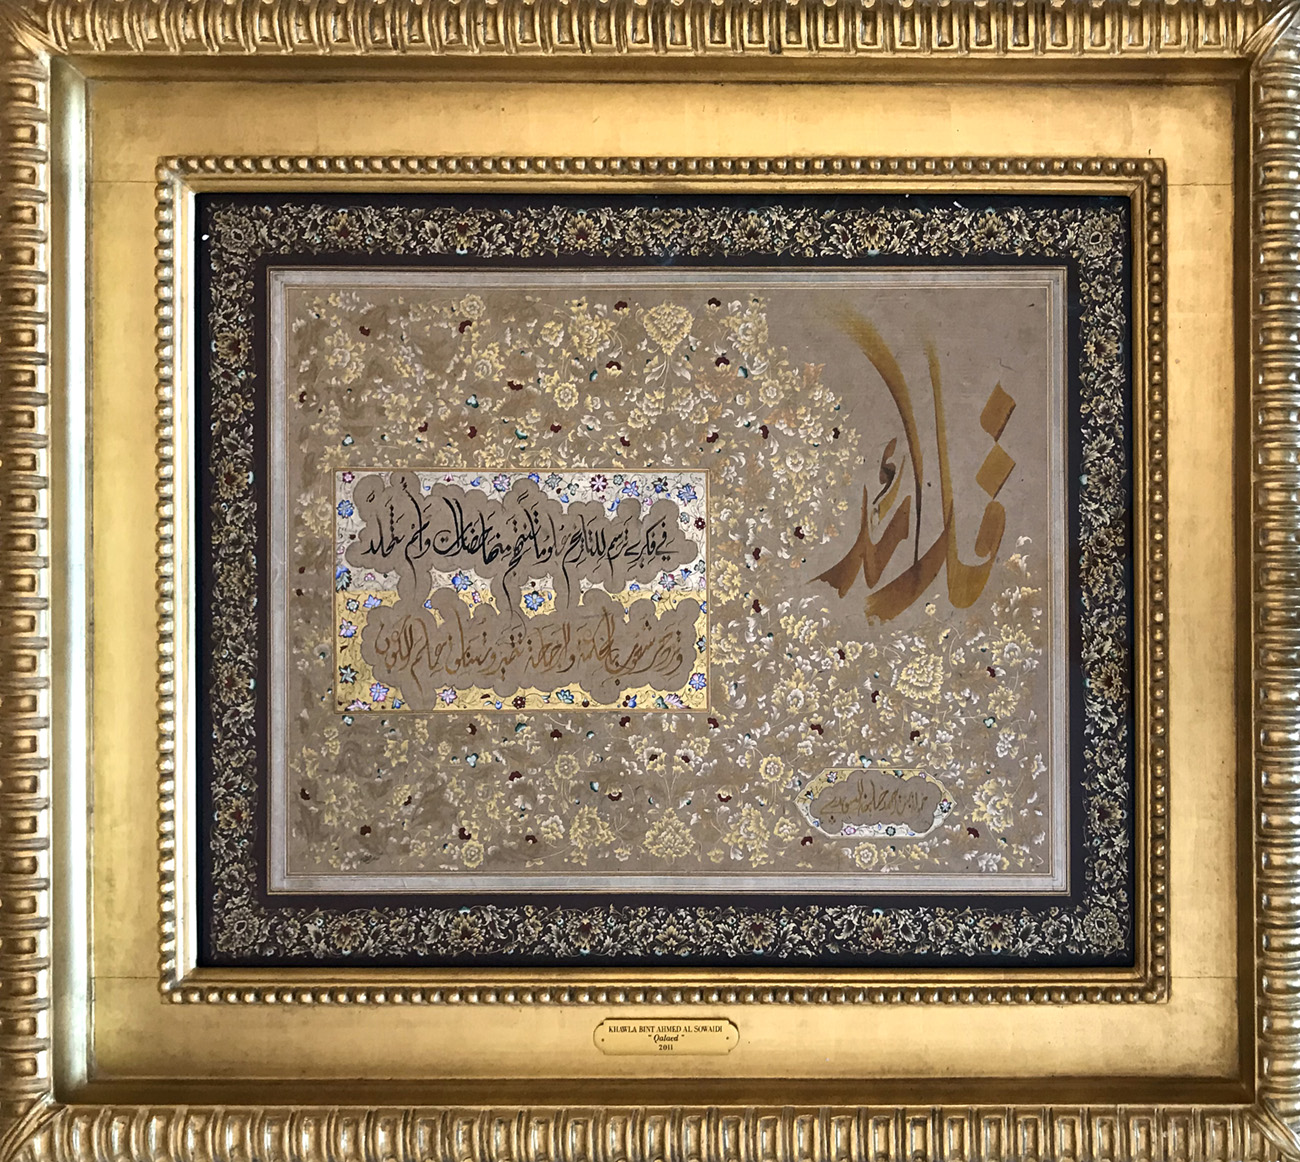 
	Qalaed (Medals)

	 

	Medals in my mind

	Painting knowledge for history 

	So civilizations can thrive and nations can become immortal.

	And people can prosper with wisdom and insight.

	Competing with cosmology and outshining it

	 

	86 x 103 cm - 33.8 x 40.5 inches

	2011

	Eloquent Poetry

	 

	 

	 
, Her Highness Sheikha Khawla Bint Ahmed Khalifa Al Suwaidi,Khawla Sheikha, Sheikha Khawla,خوله, Khawla Suwaidi,Khawla, khawla al sowaidi,khawla sowaidi,Khawla Al Suwaidi,National Poetry, Poetry, Arabic poems, Arab poet,Arab calligrapher,Arab artist,خوله السويدي, khawla alsuwaidi,khawla al suwaidi, peace and love exhibition at saatchi gallery london, peace & love,arabic poem,arabic poetry,peace and love, peace ,love, sheikha khawla bint ahmed bin khalifa al suwaidi,sheikha khawla bint ahmed bin khalifa al suwaidi,khawla  al suwaidi,khawla  alsuwaidi, khawla, خوله السويدي , خوله بنت احمد بن خليفه السويدي , خوله   احمد   السويدي  